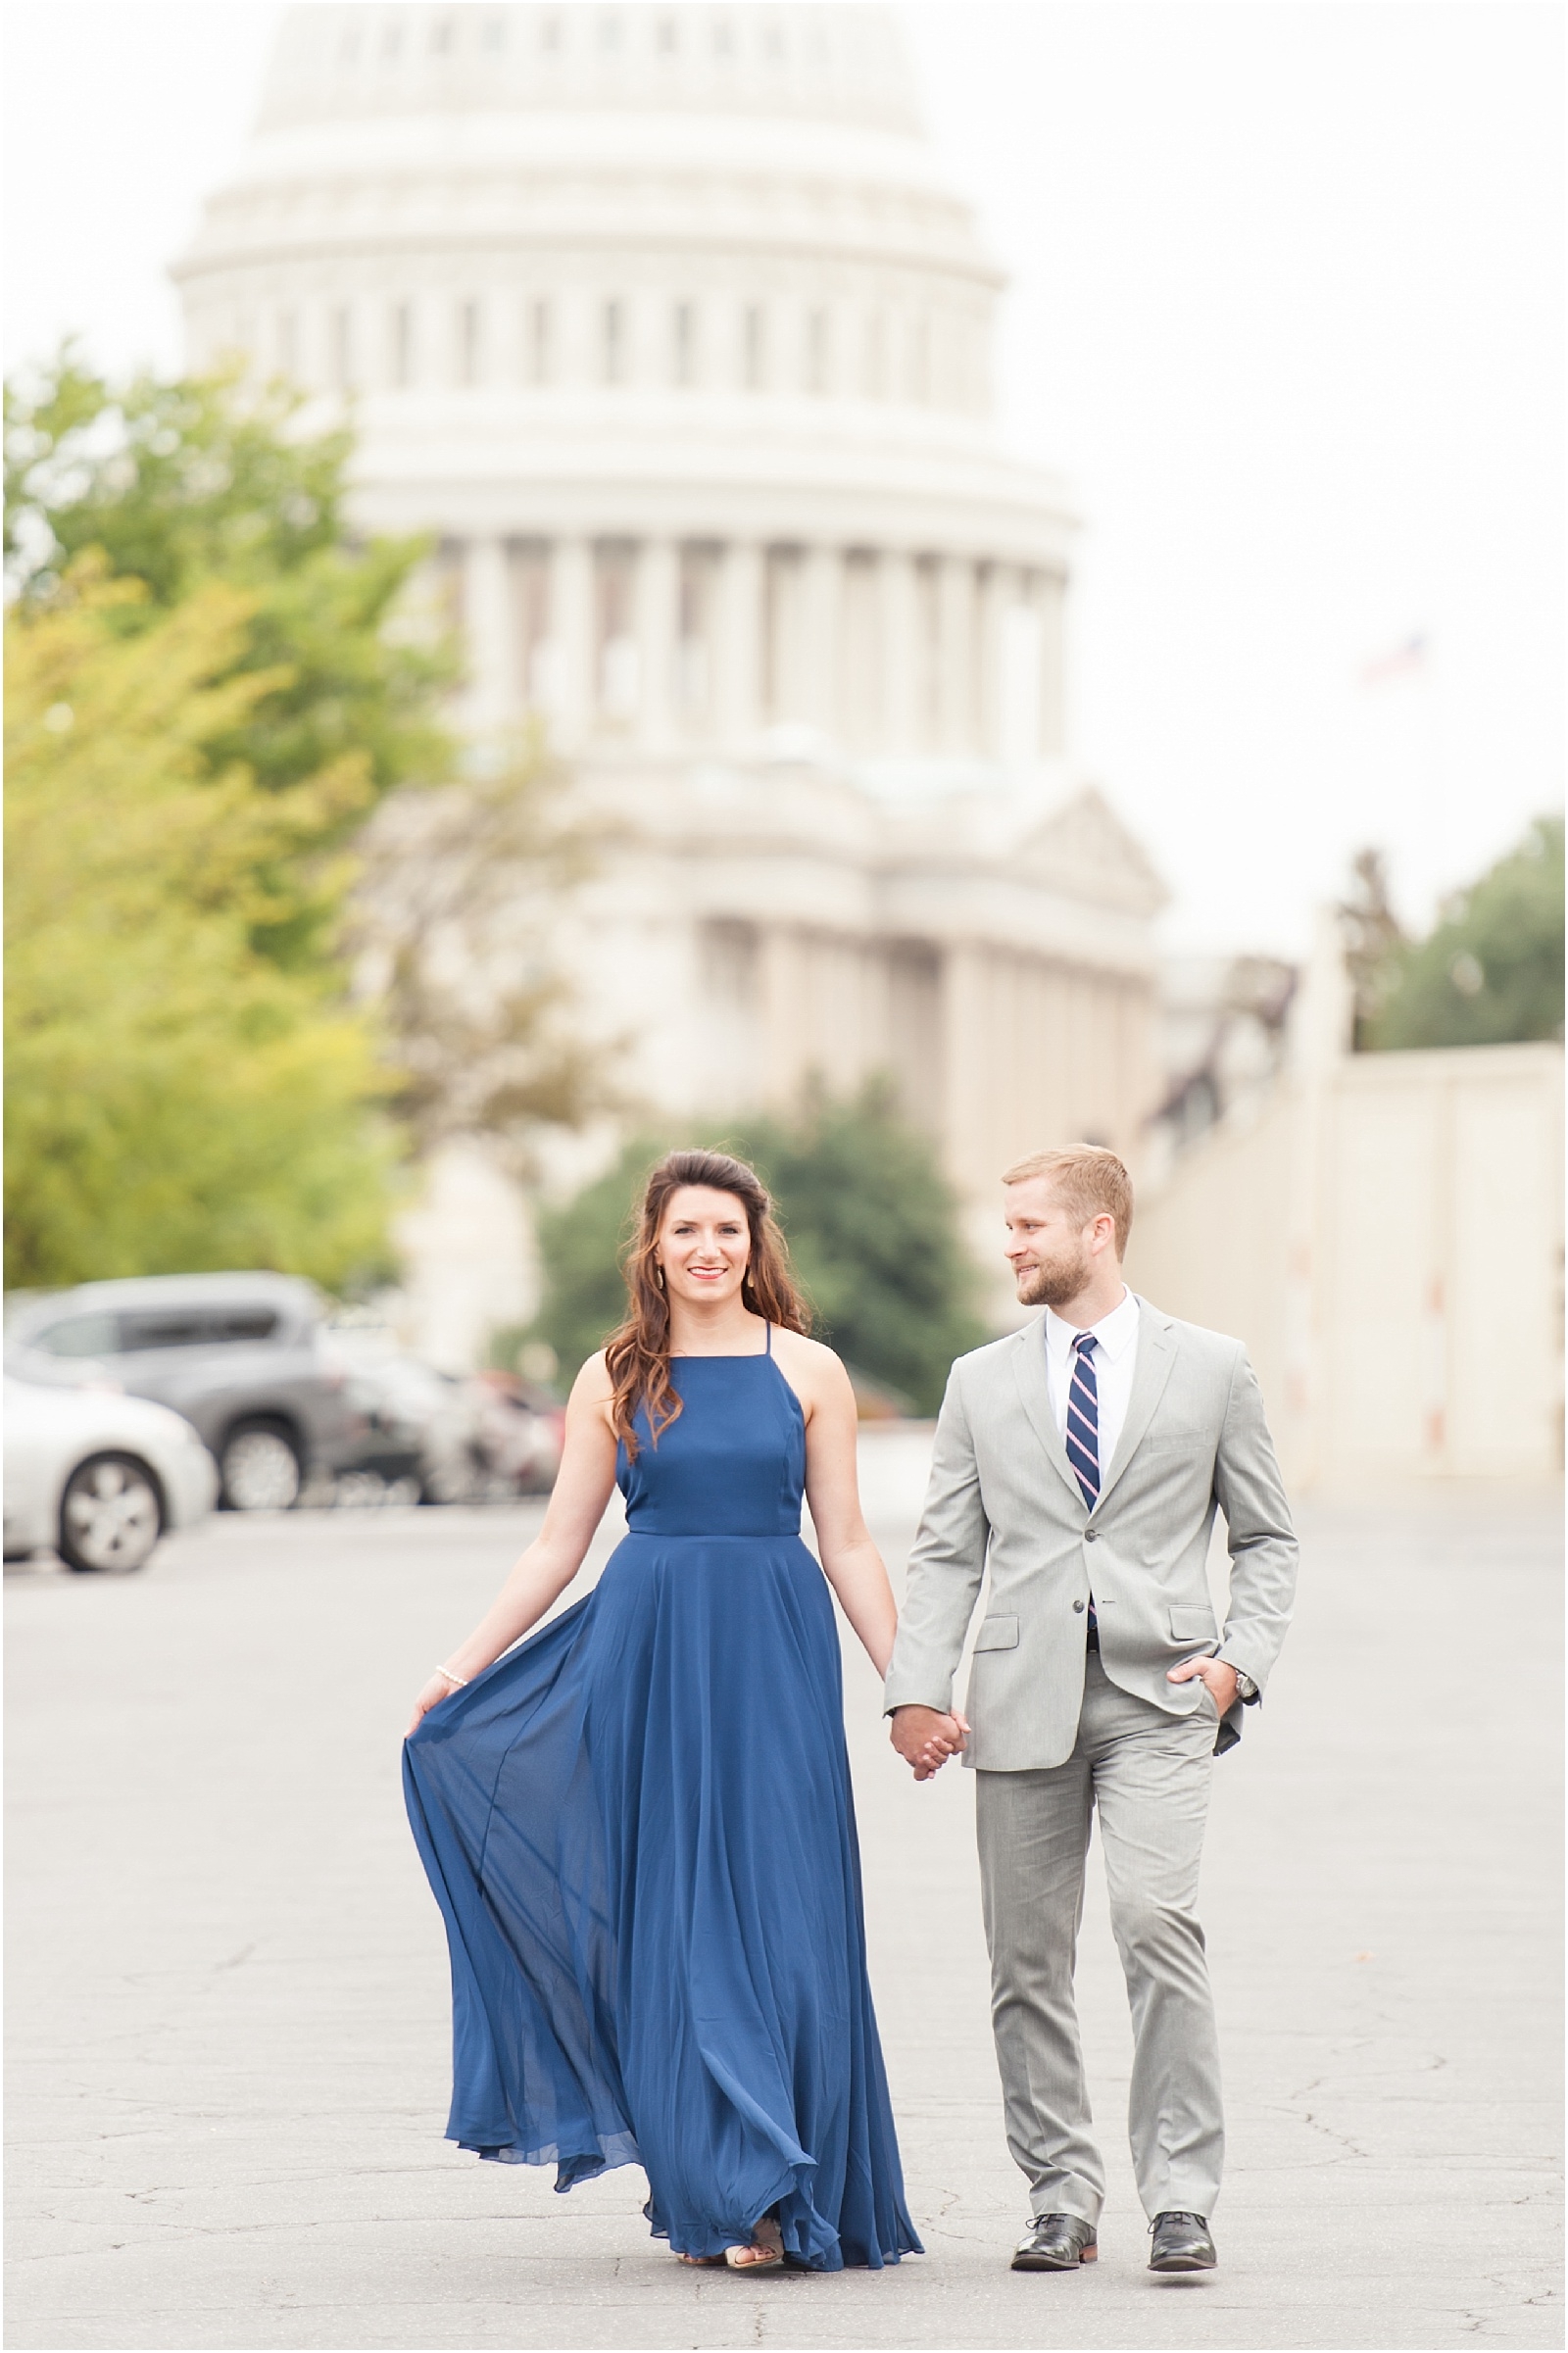 0028 Bret and Brandie Photography| Washington DC Engagement | Megan and Connor.jpg